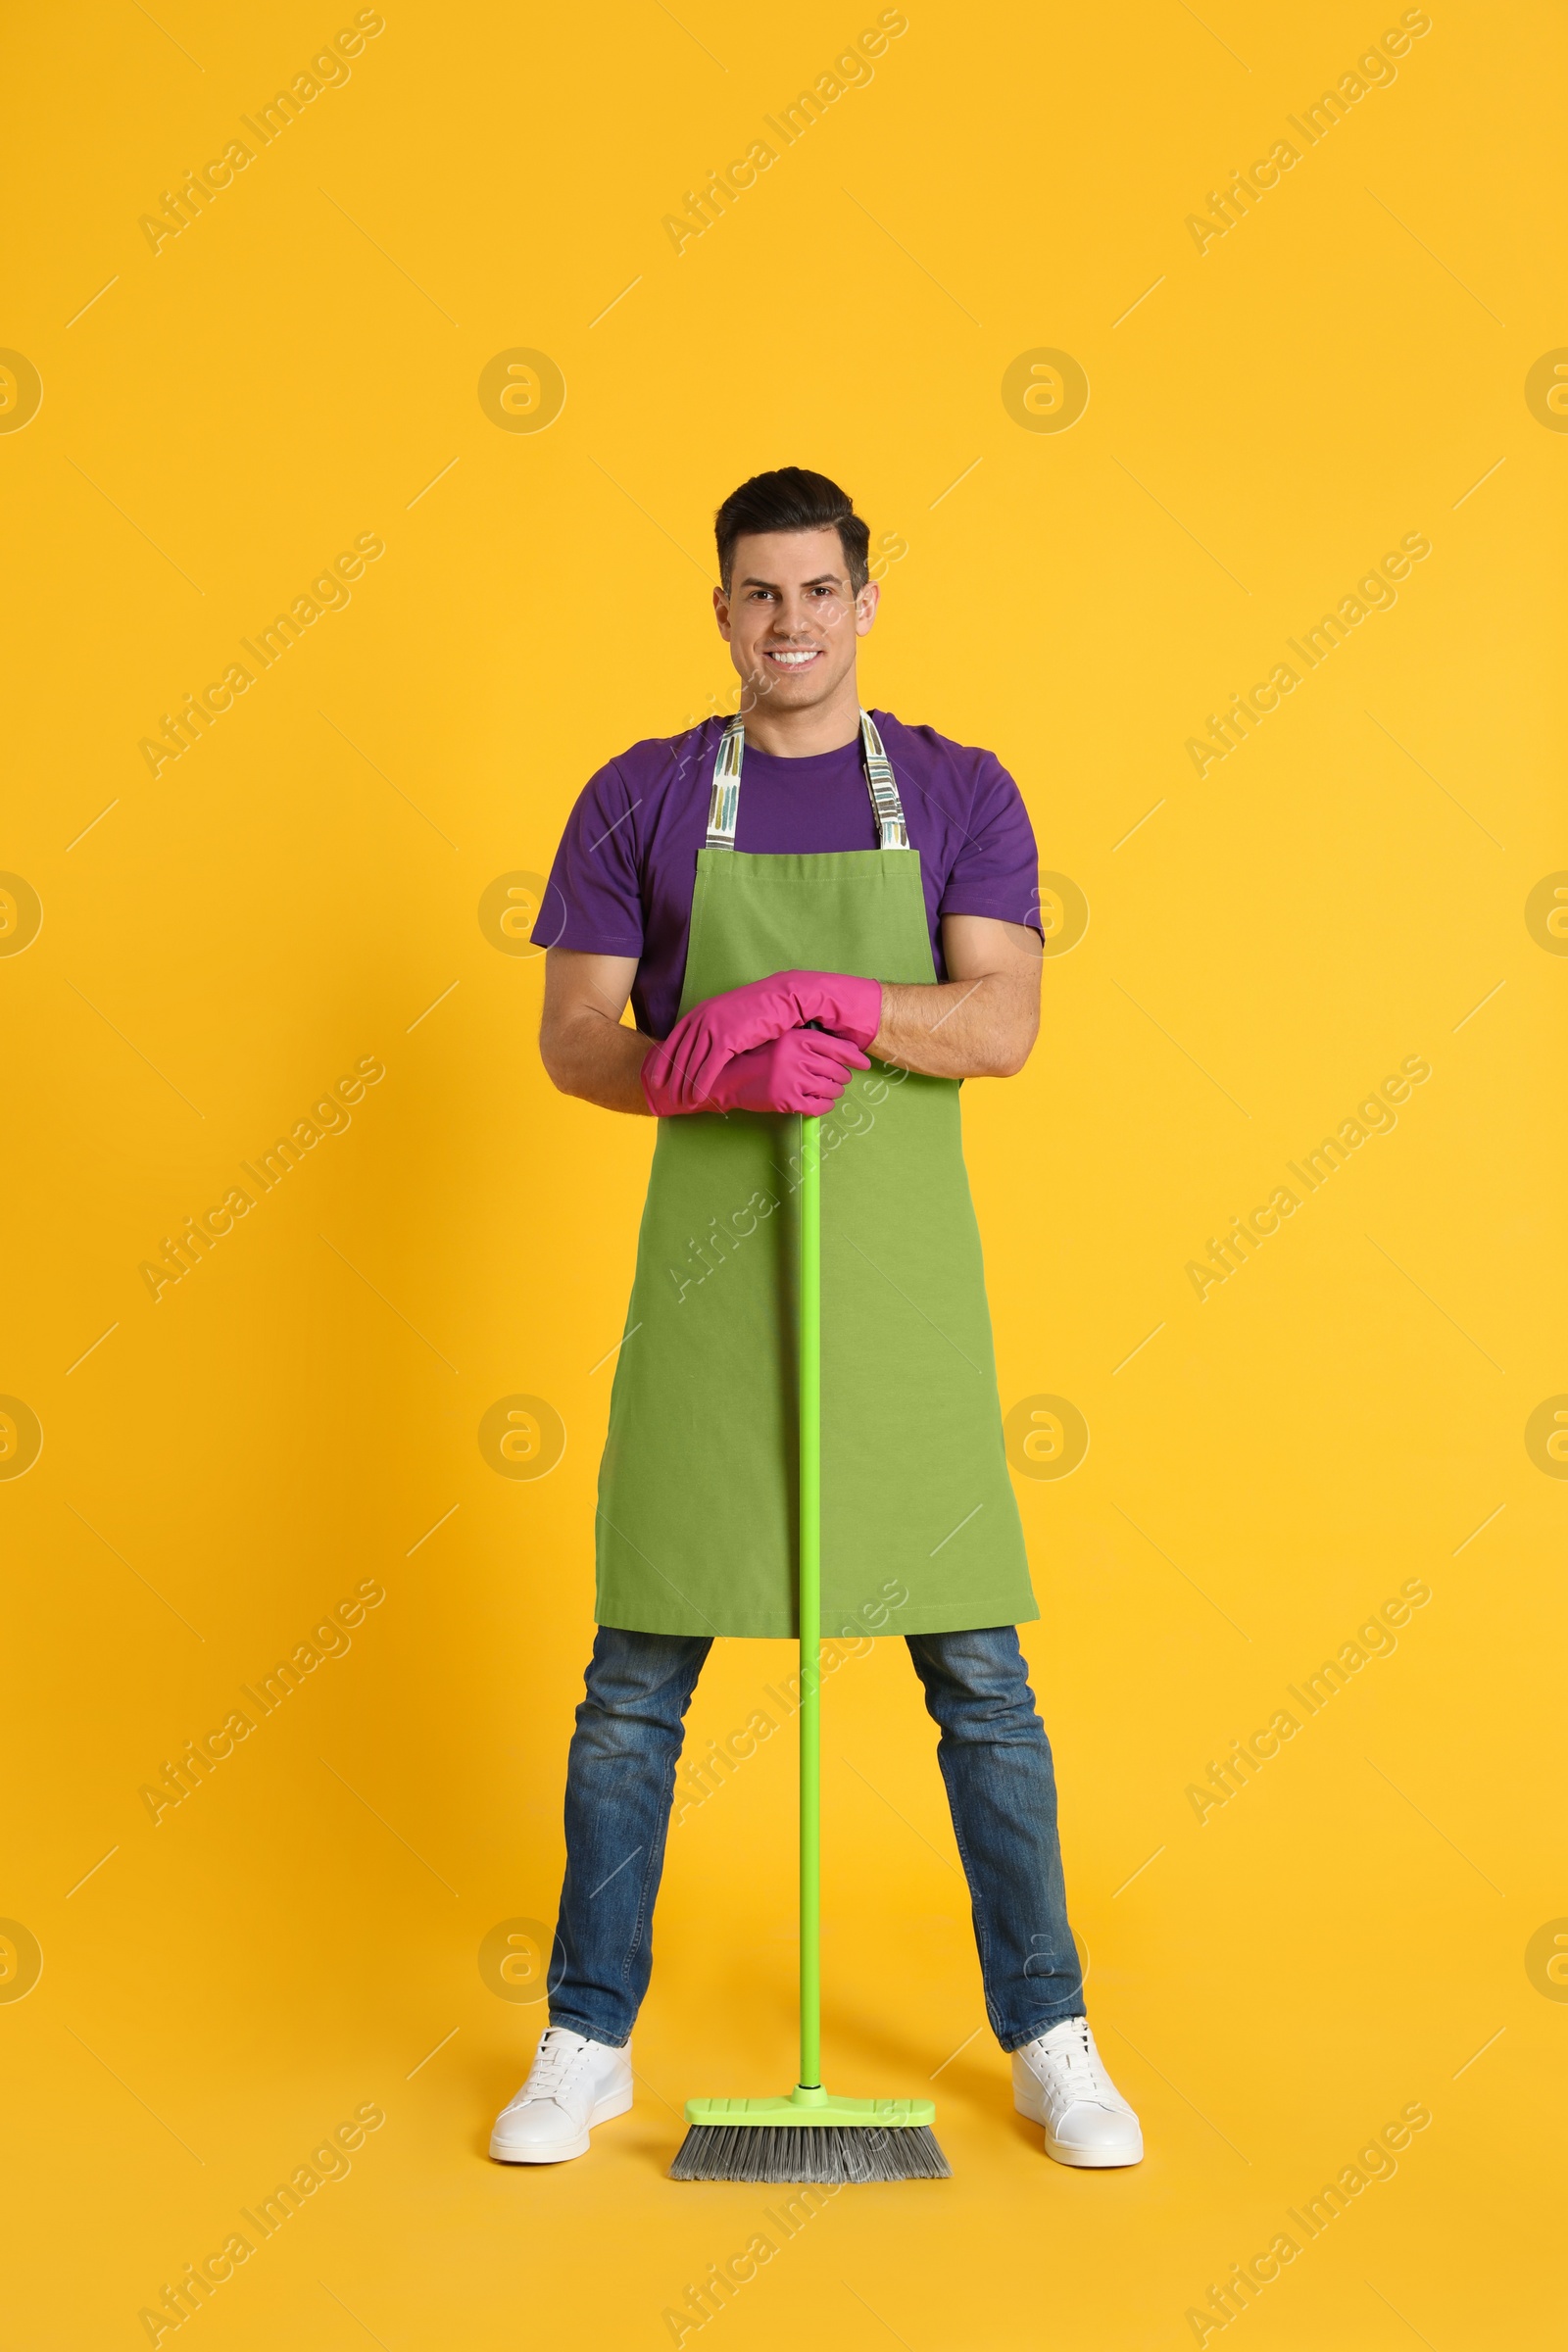 Photo of Man with green broom on orange background